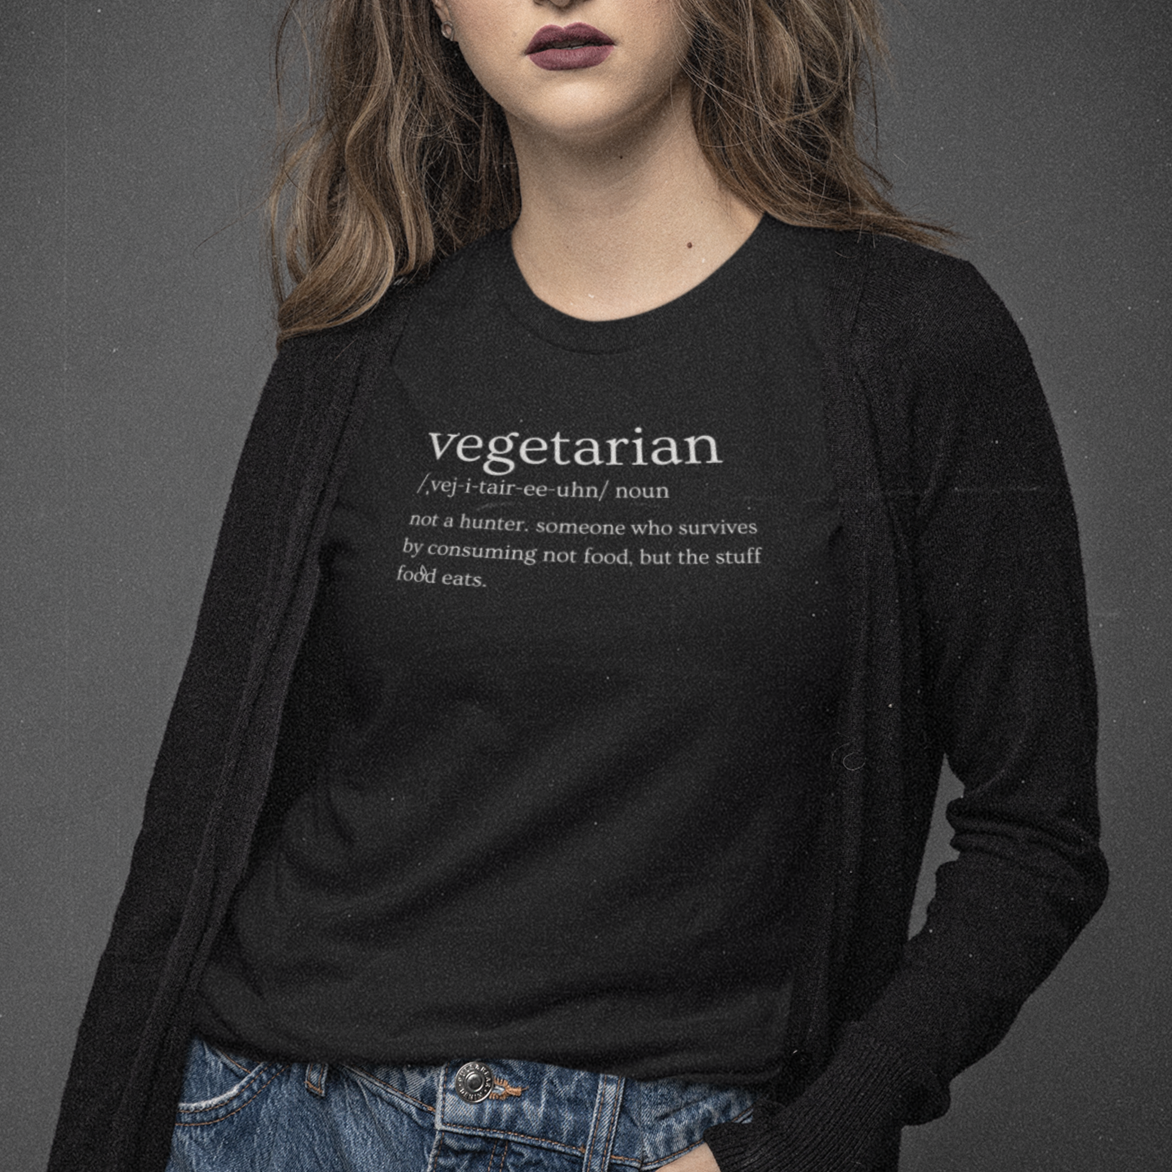 vegetarian-definition-not-a-hunter-someone-who-survives-by-consuming-not-food-but-the-stuff-food-eats-bella-canvas-t-shirt-featuring-a-serious-young-woman